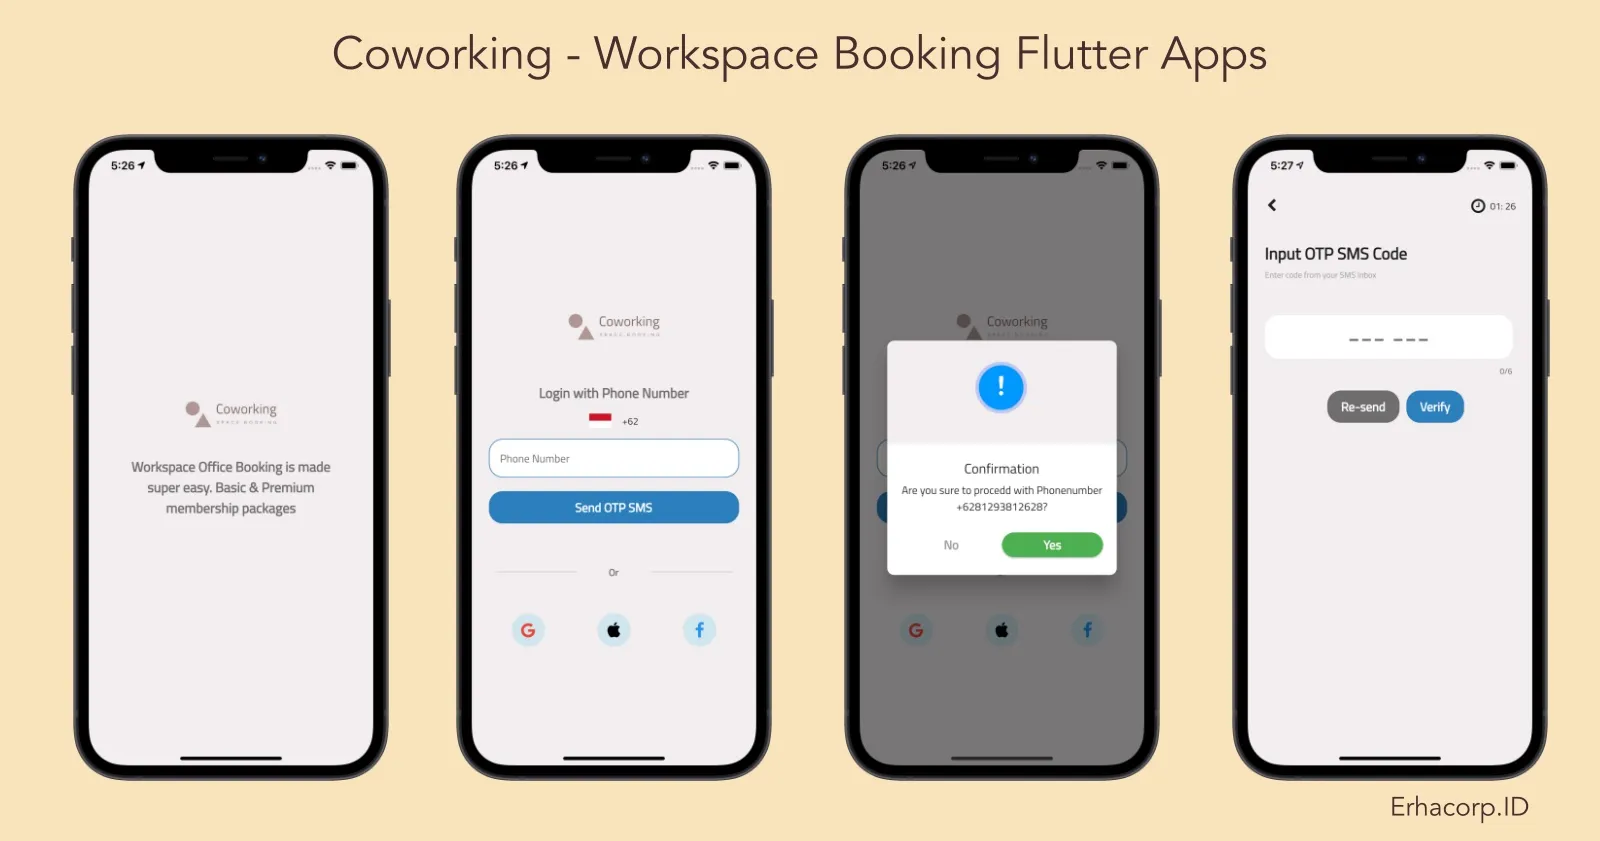 Coworking - Workspace Office Booking Full Flutter Apps #1, Coming Soon